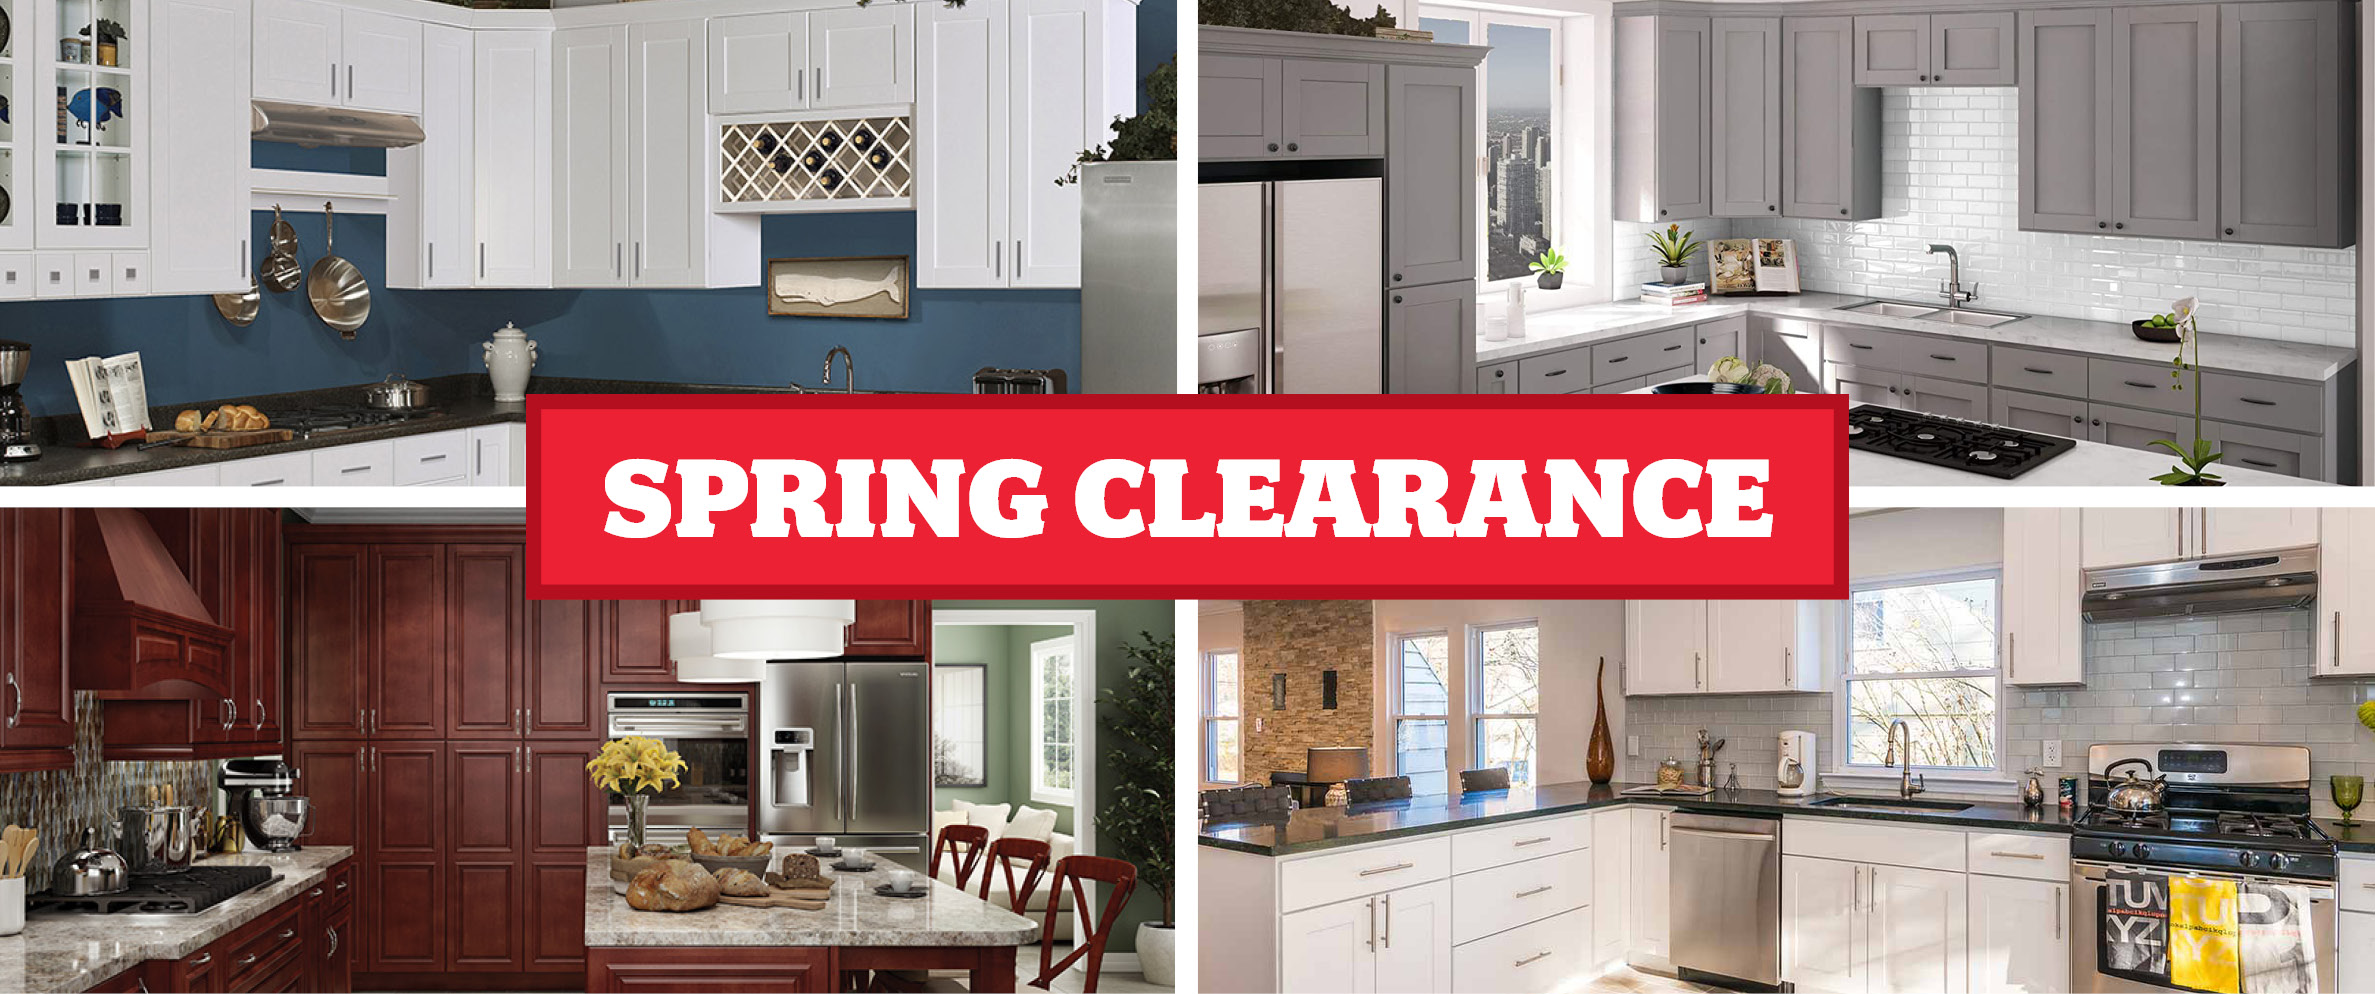 Spring Clearance web graphic MD 2